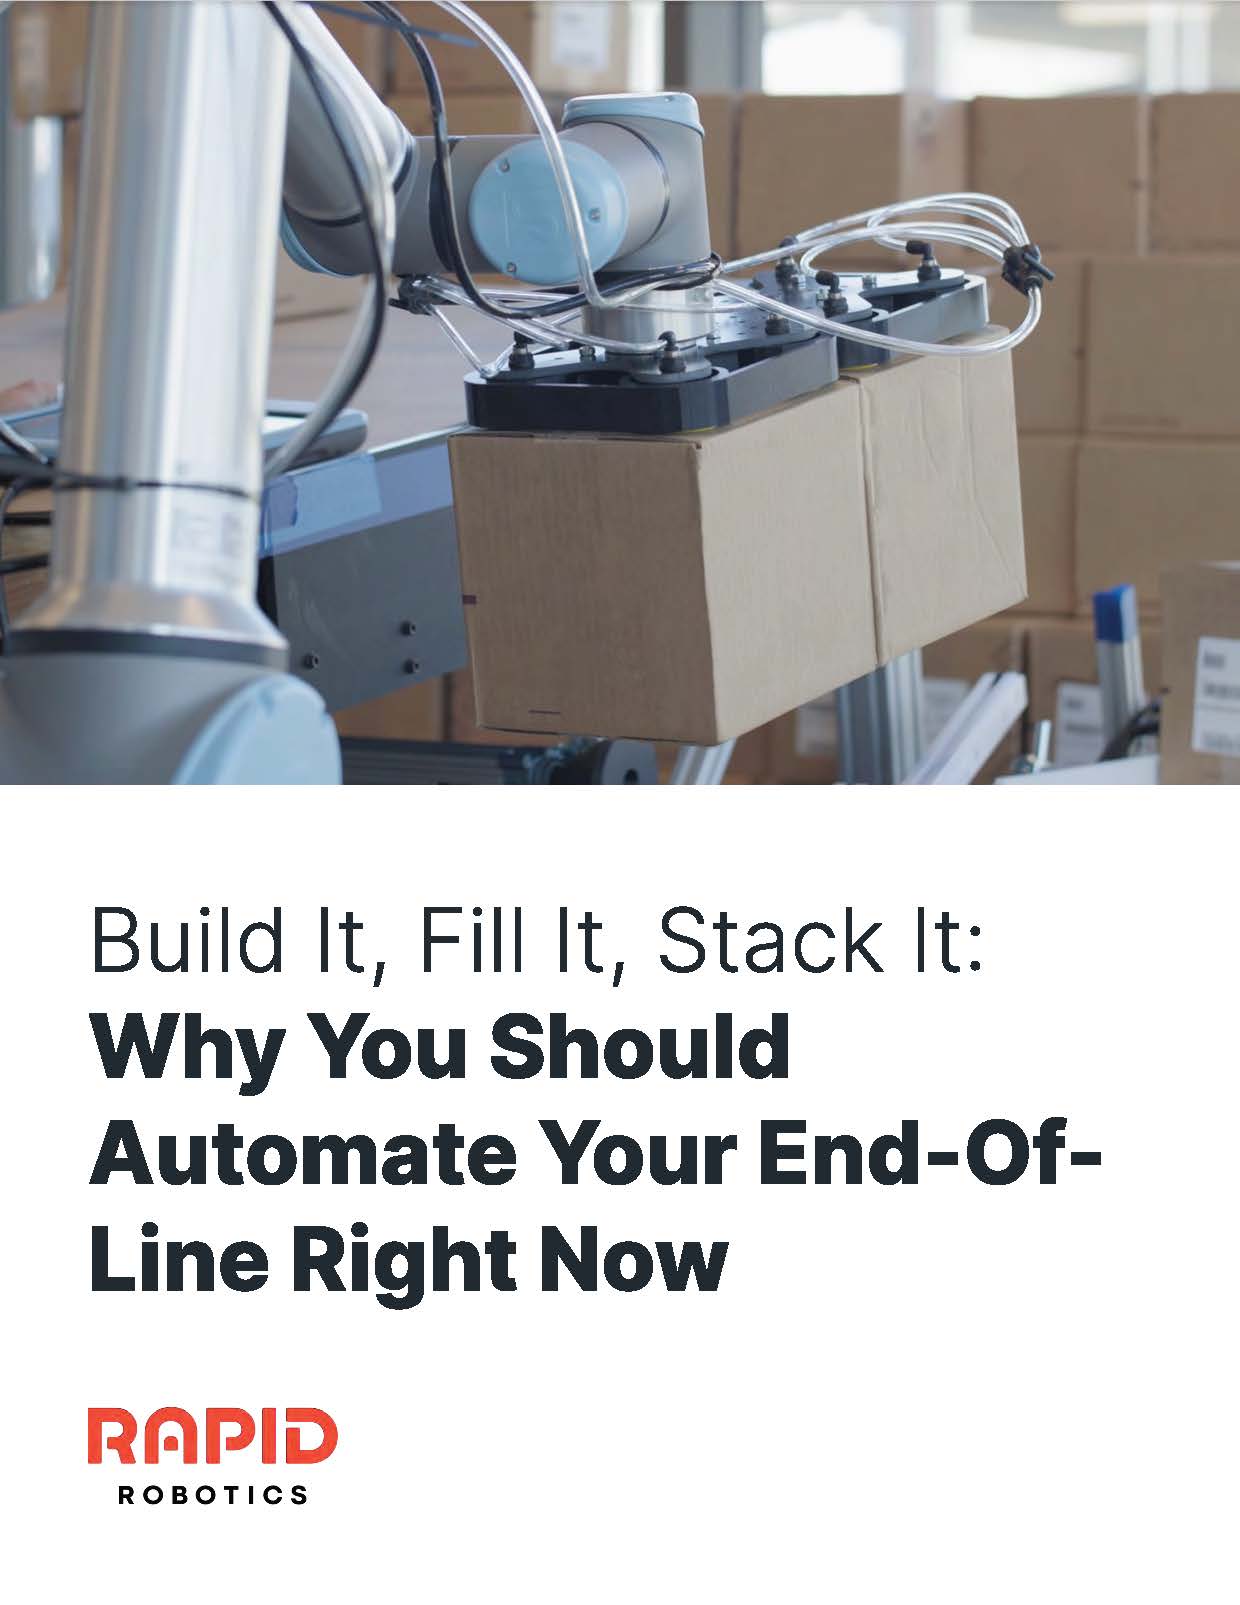 An image of the cover of our white paper titled Build It, Fill It, Stack It: Why You Should Automate Your End-of-Line Right Now